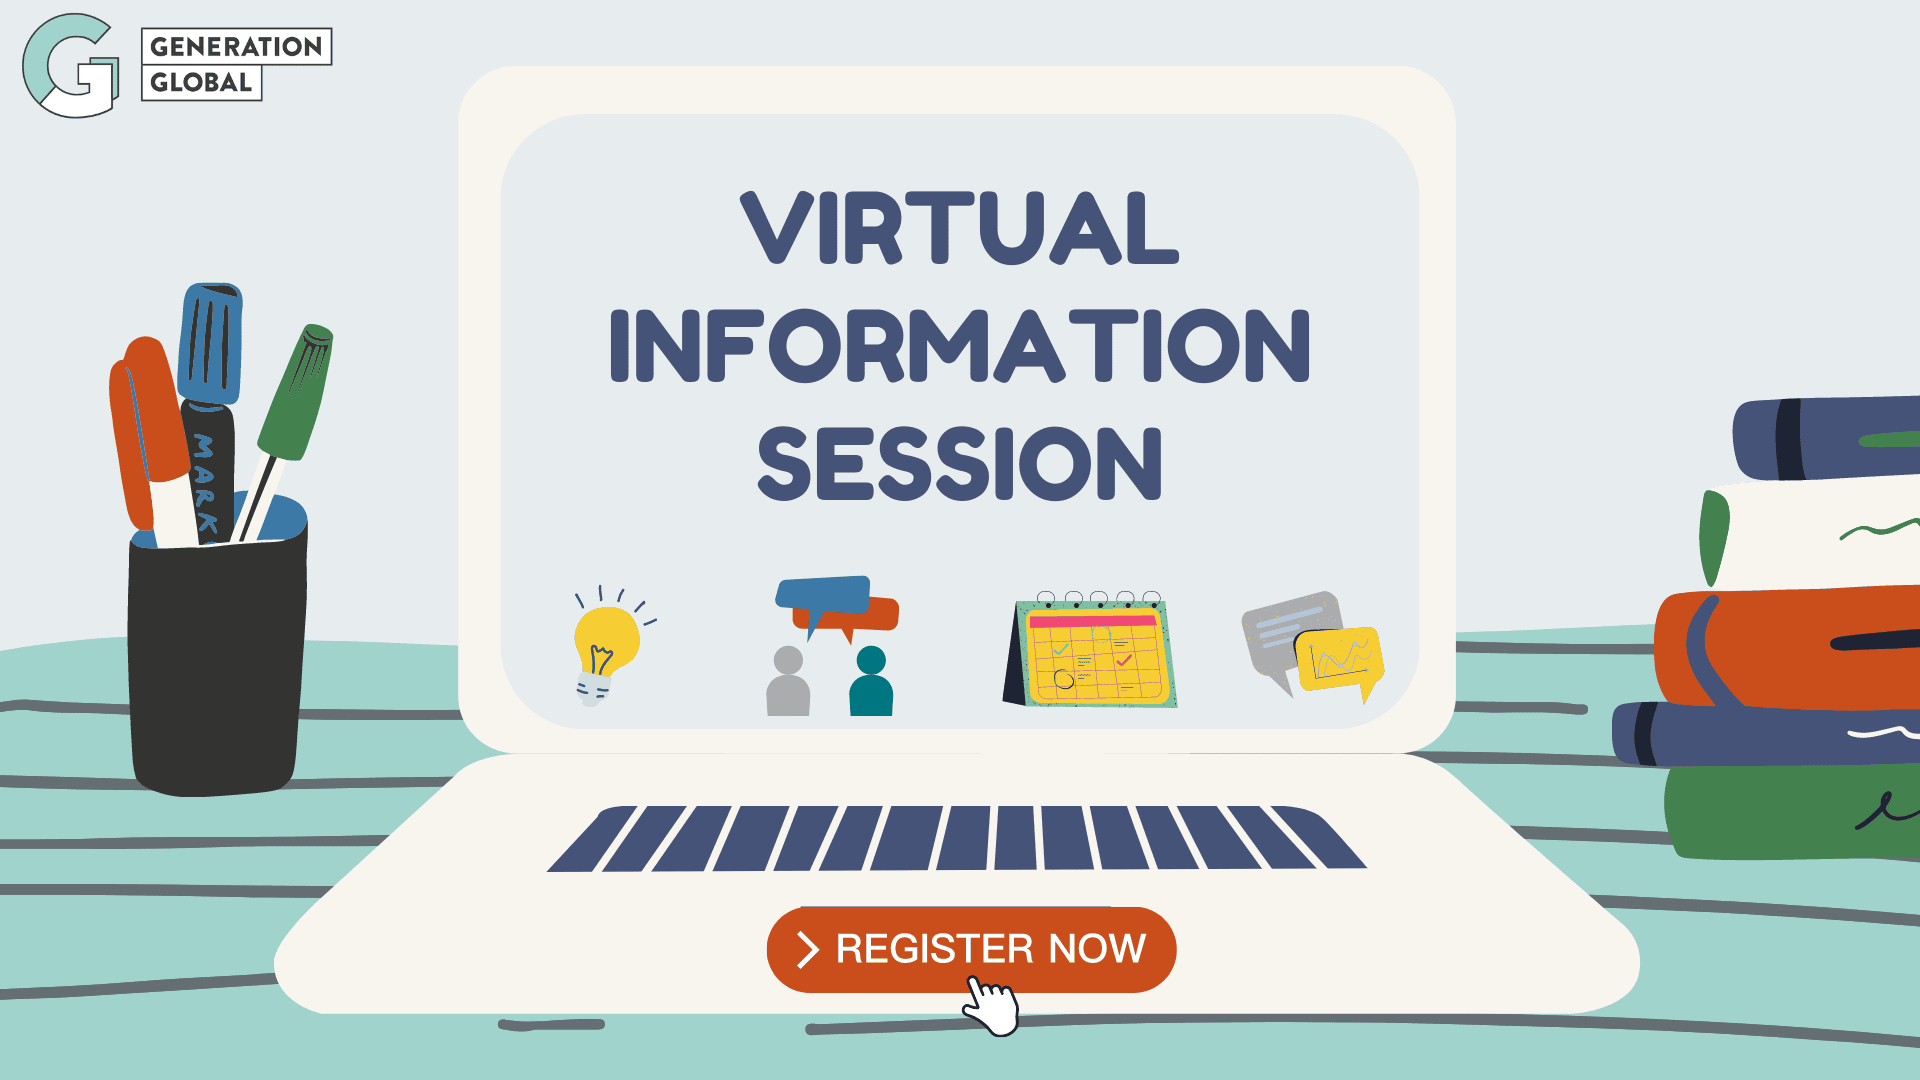 Register now for the Virtual Information Session